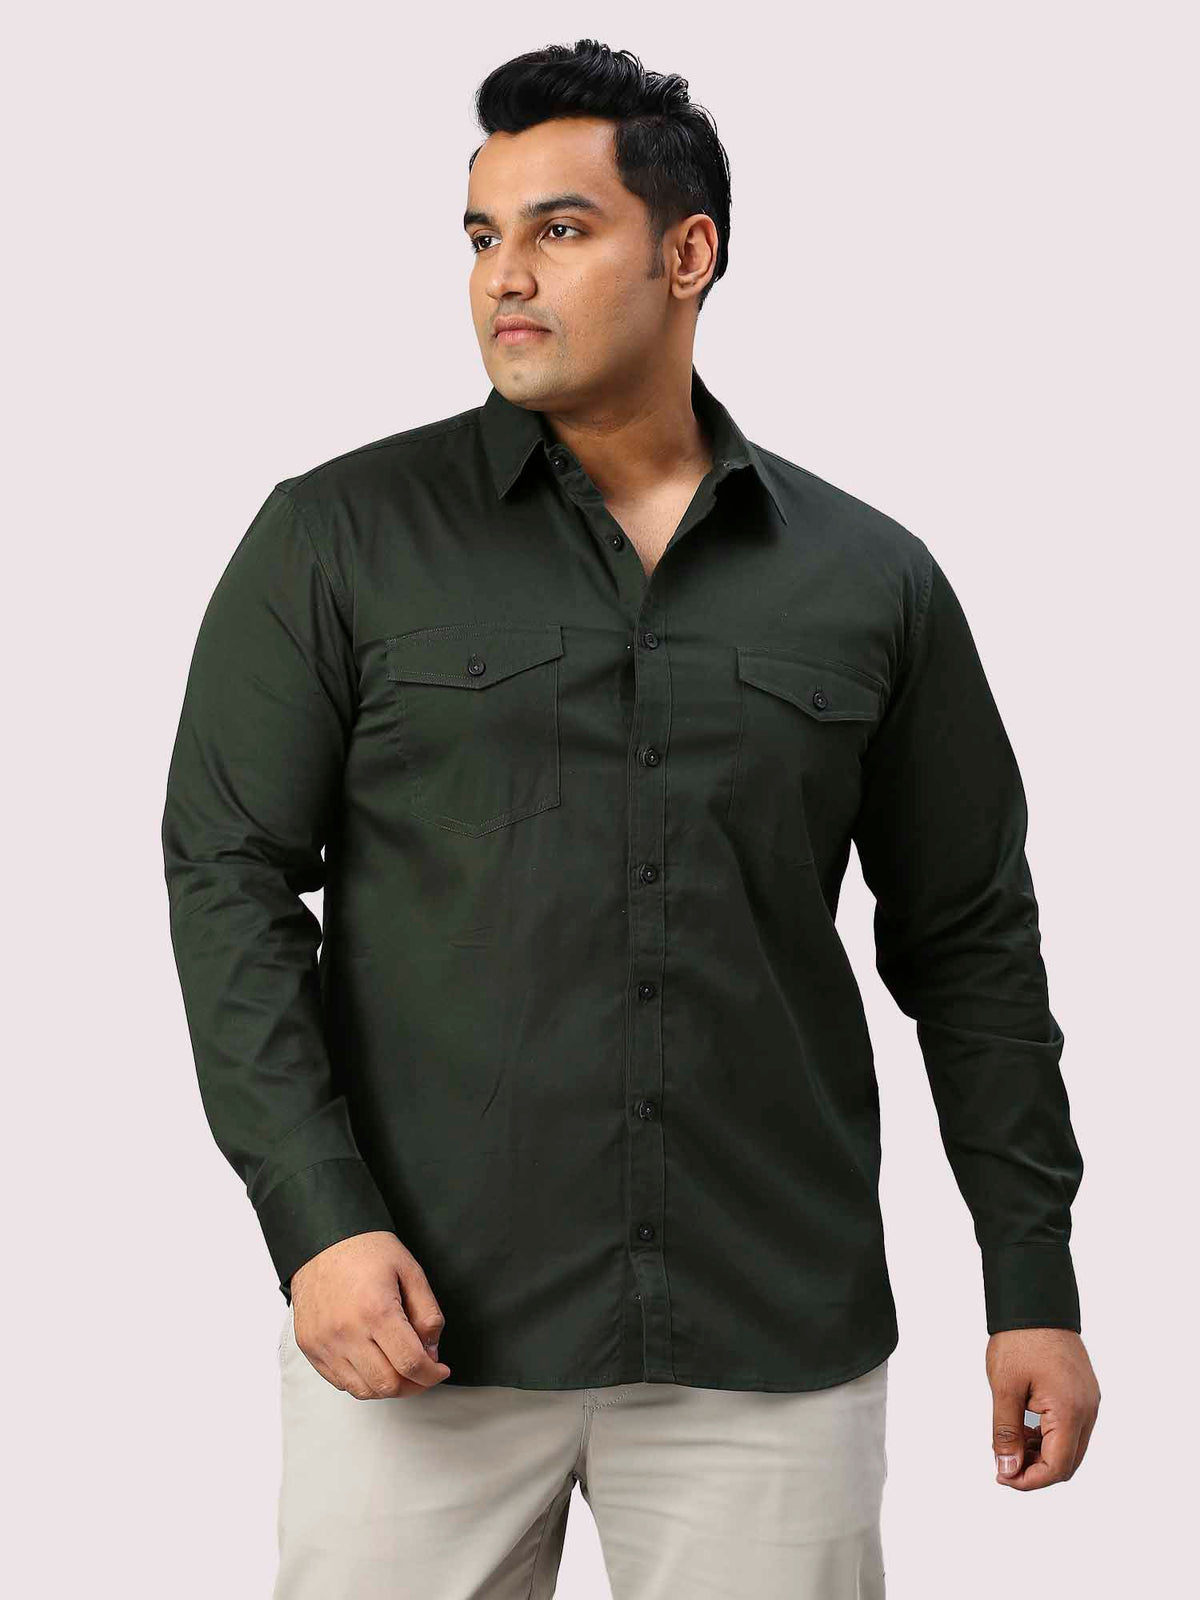 Olive Green Solid Pure Cotton Double Pocket Full Sleeve Shirt Men's Plus Size